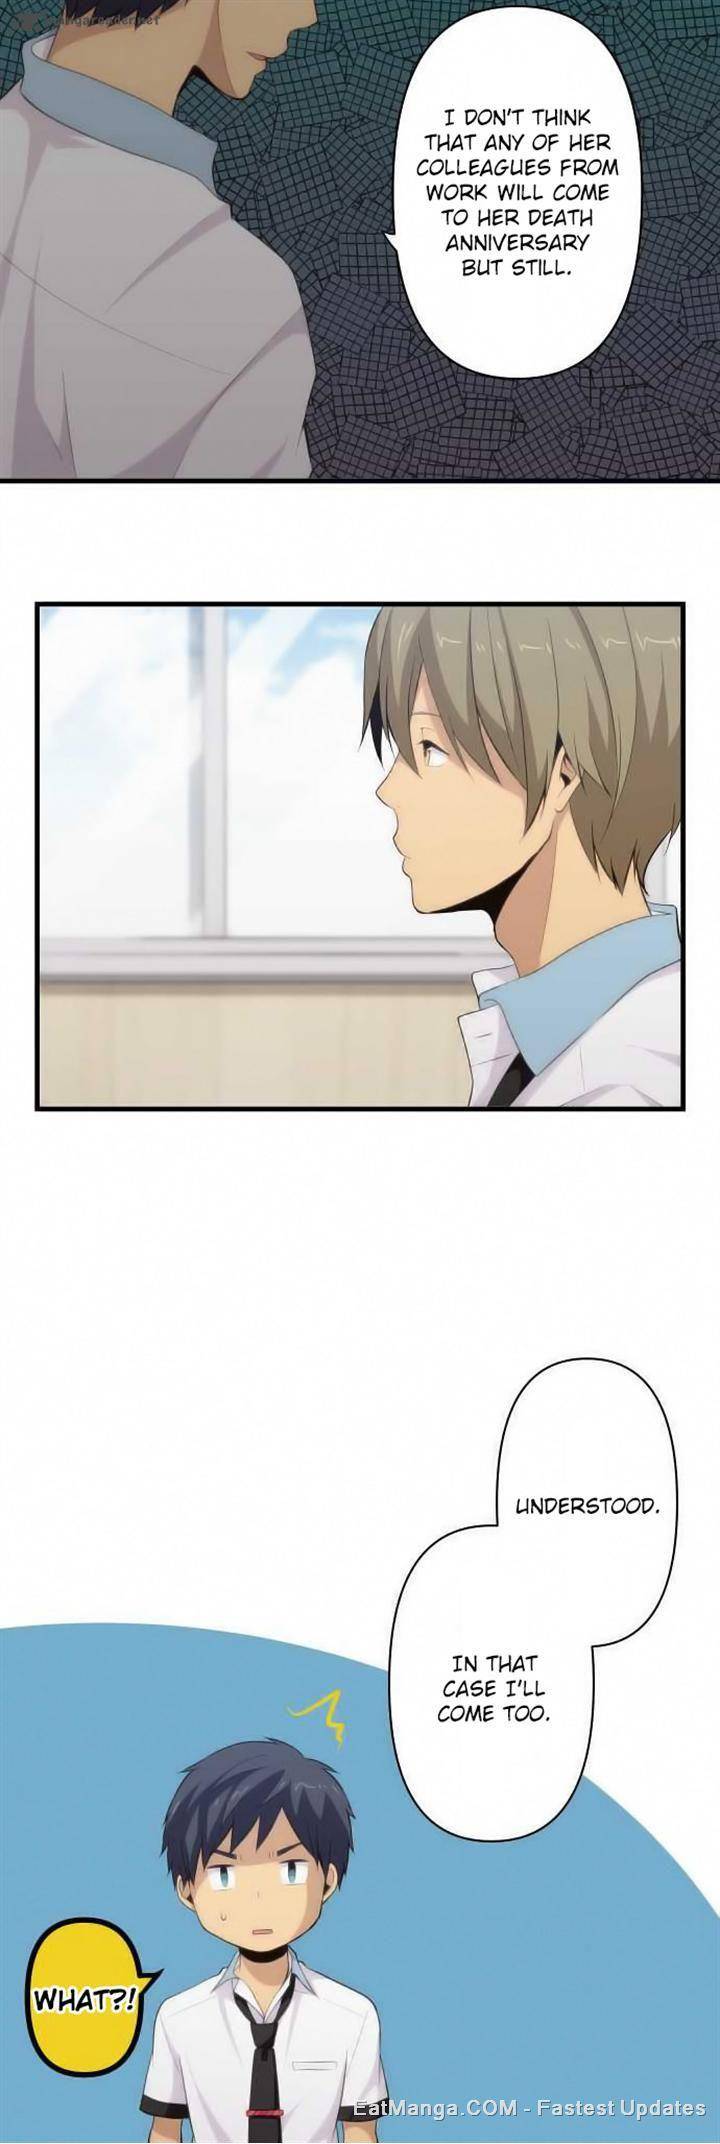 Relife 86 8